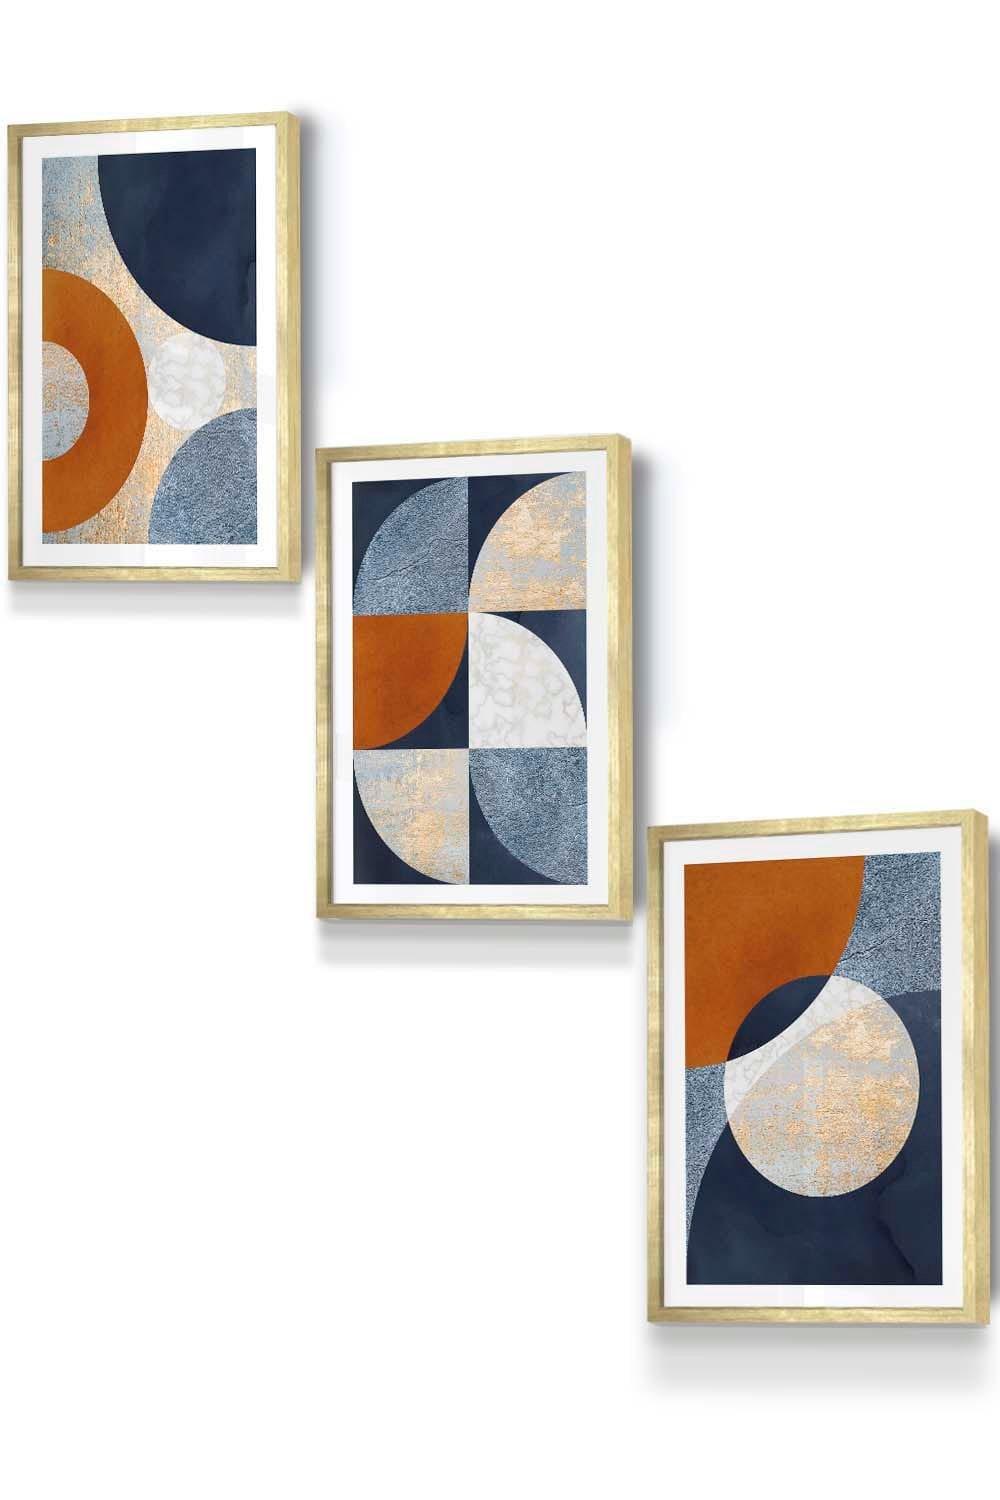 Geometric Abstract Textured Circles in Navy Blue Orange Gold Framed Wall Art - Small